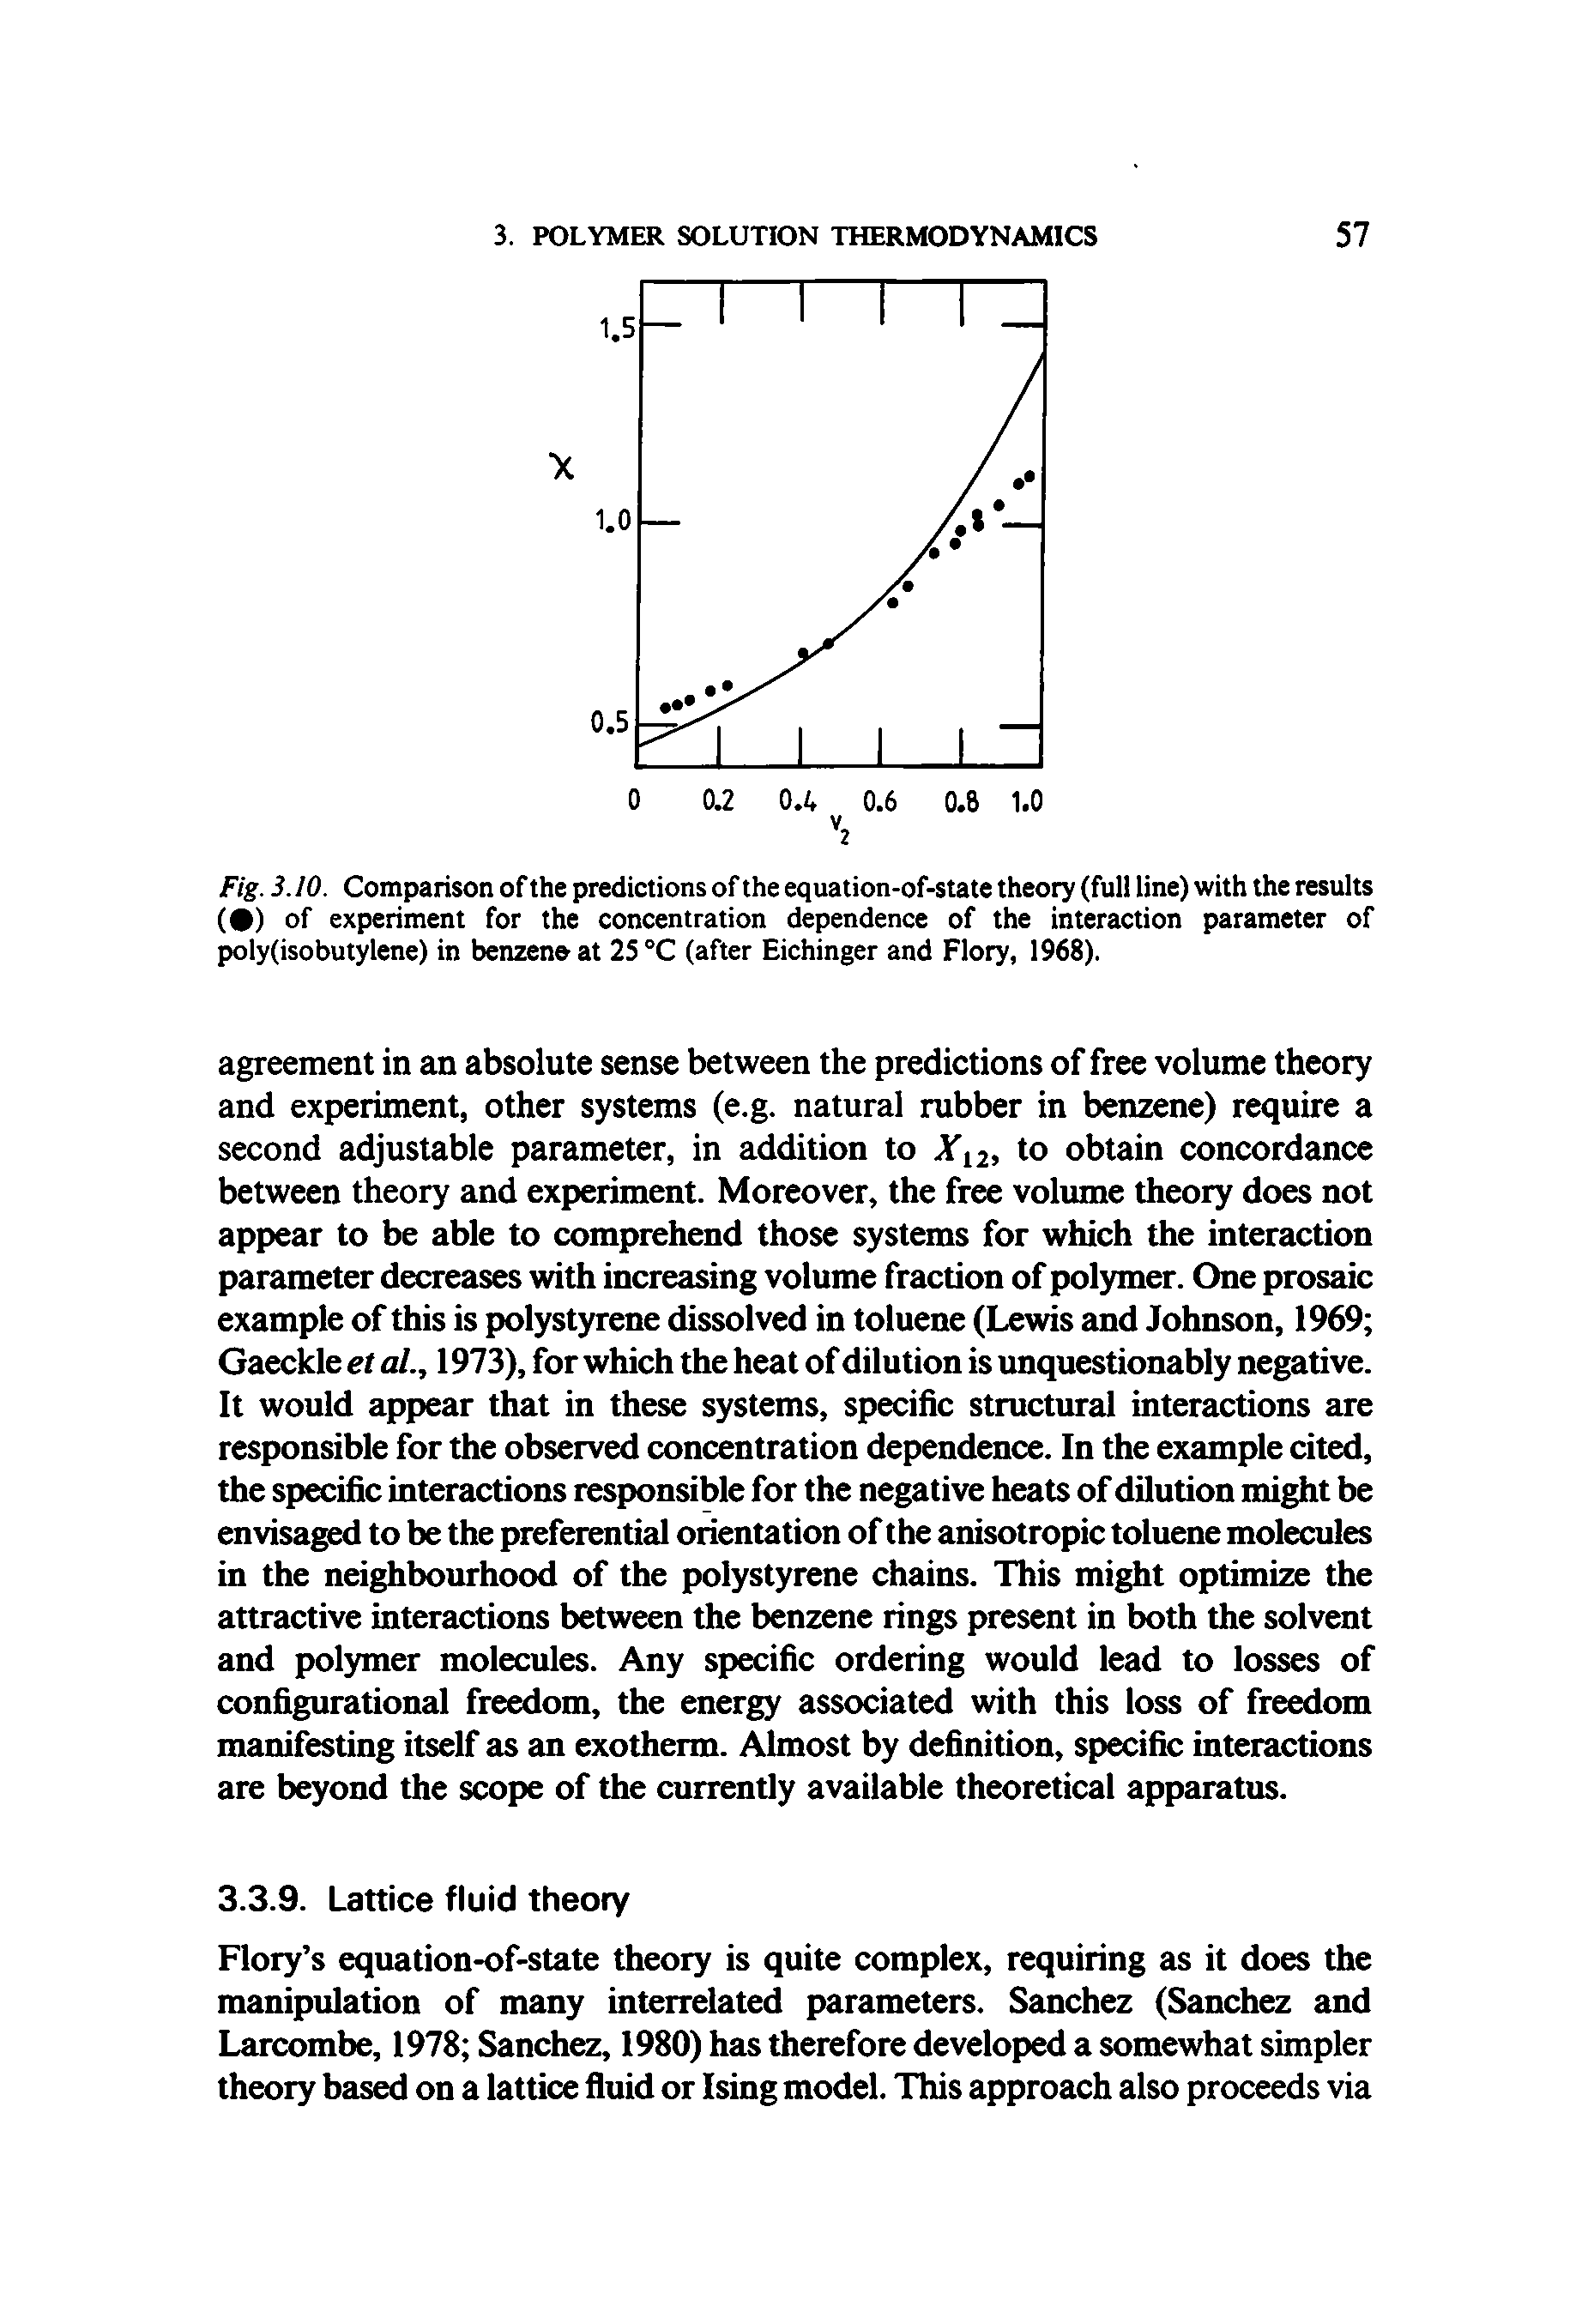 Fig. 3.10. Comparison of the predictions of the equation-of-state theory (full line) with the results ( ) of experiment for the concentration dependence of the interaction parameter of poly(isobutylene) in benzene at 2S °C (after Eichinger and Flory, 1968).